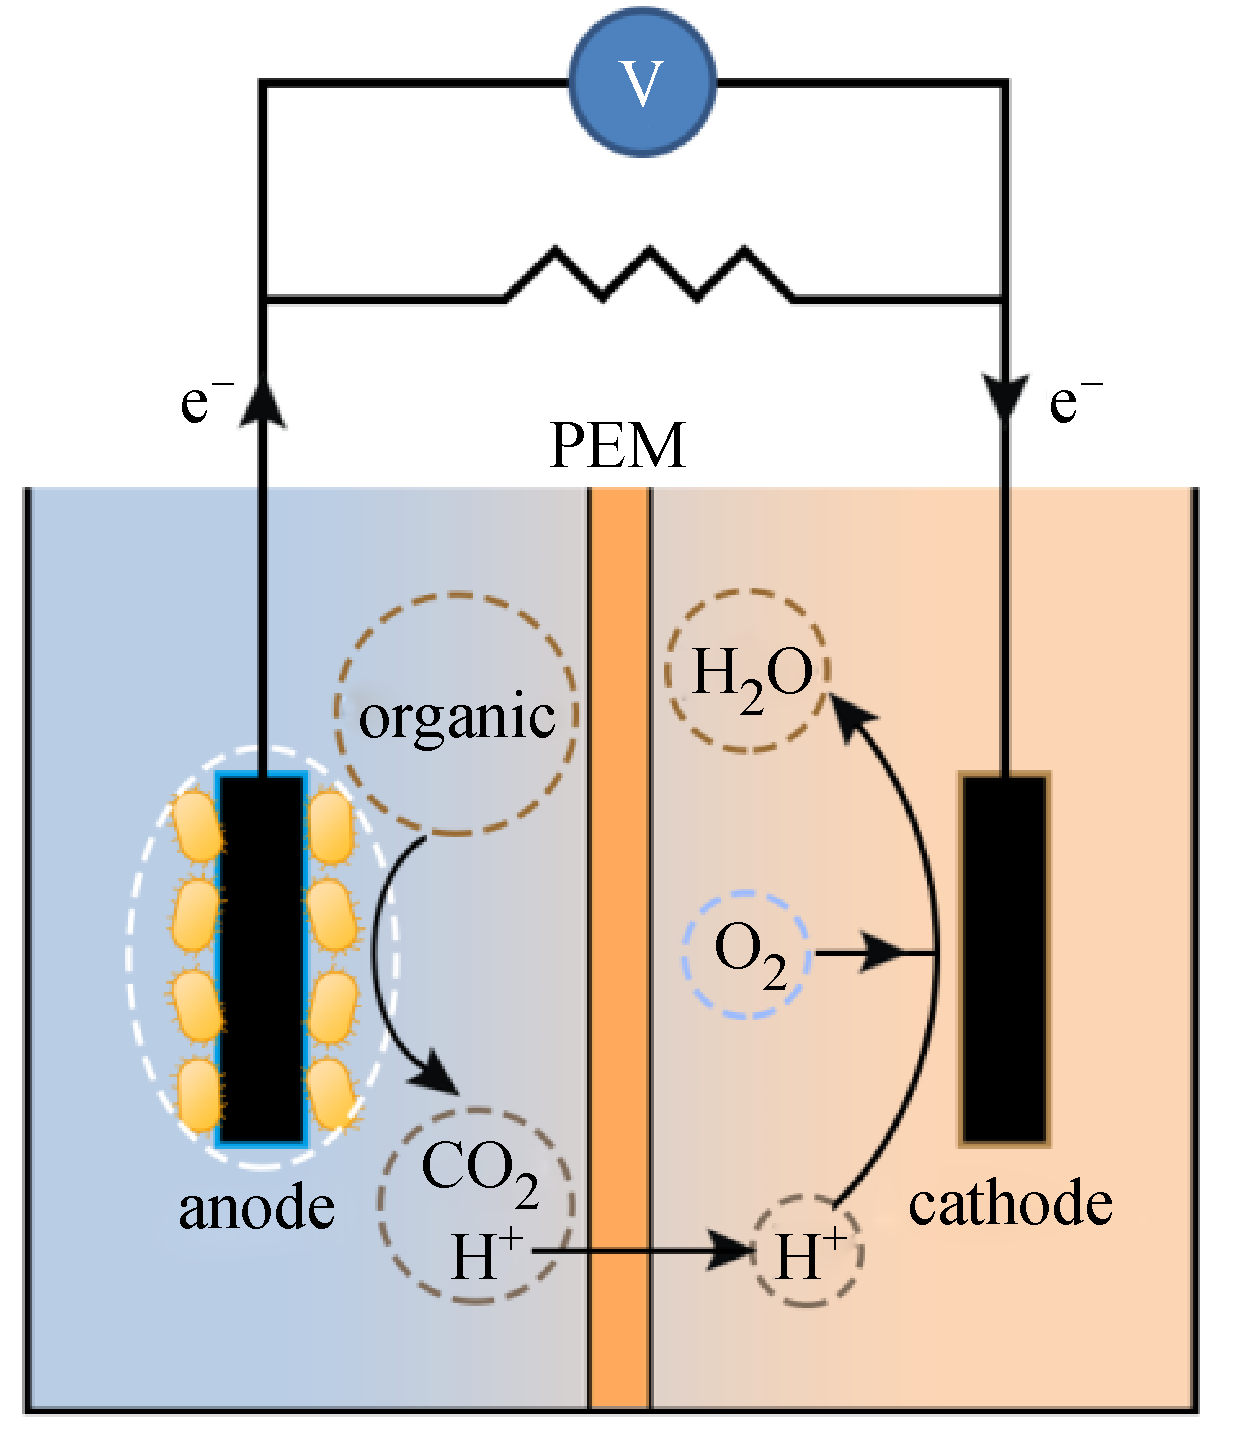 Glycerol degradation in single chamber microbial fuel cells